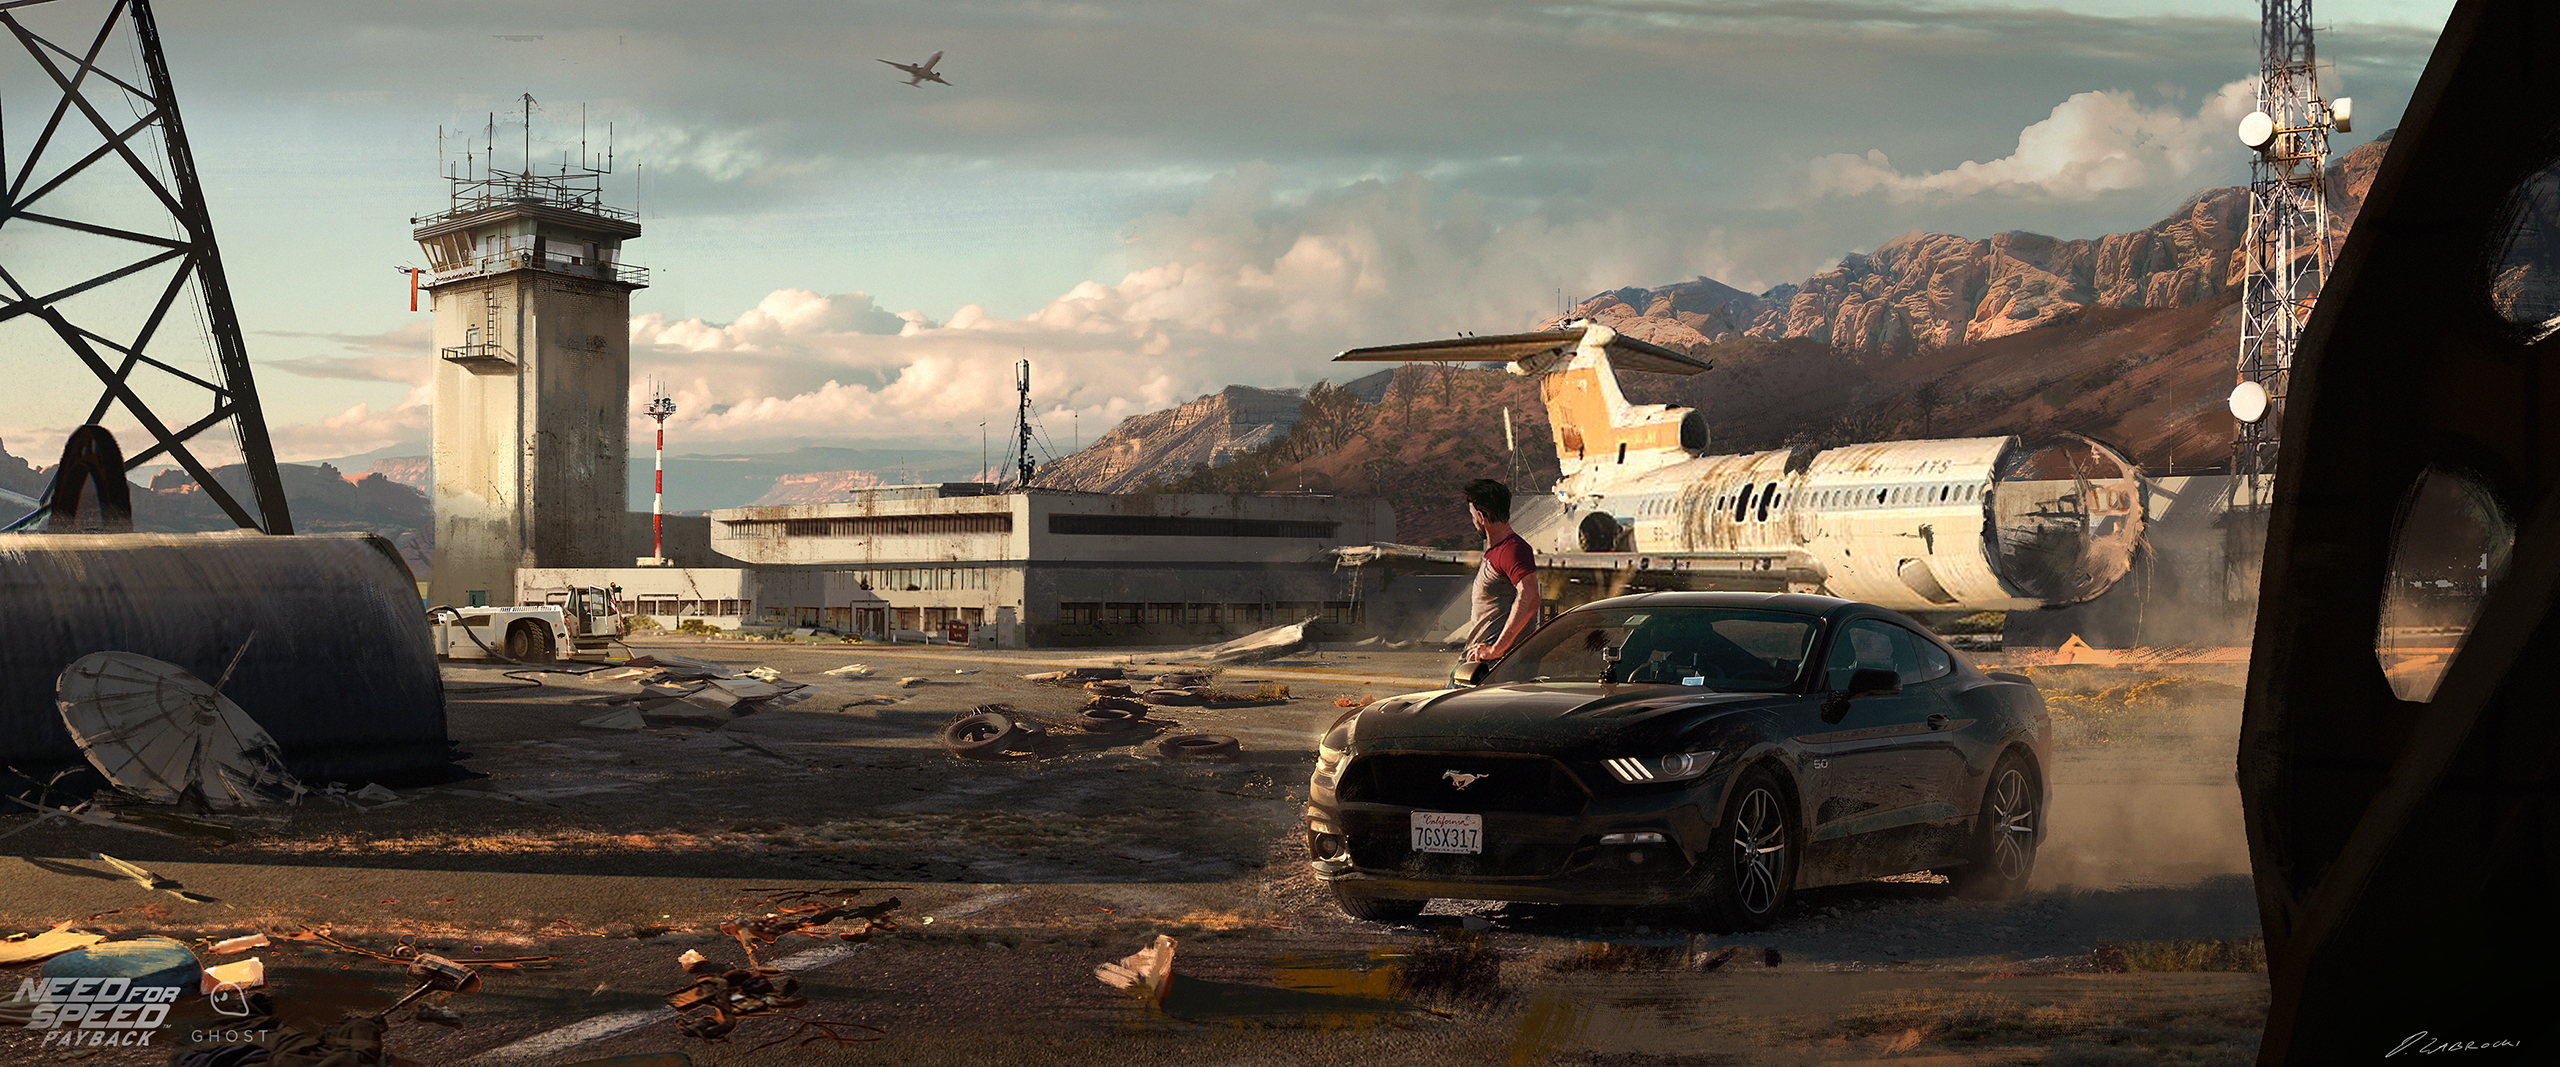 pixel 3 need for speed payback image